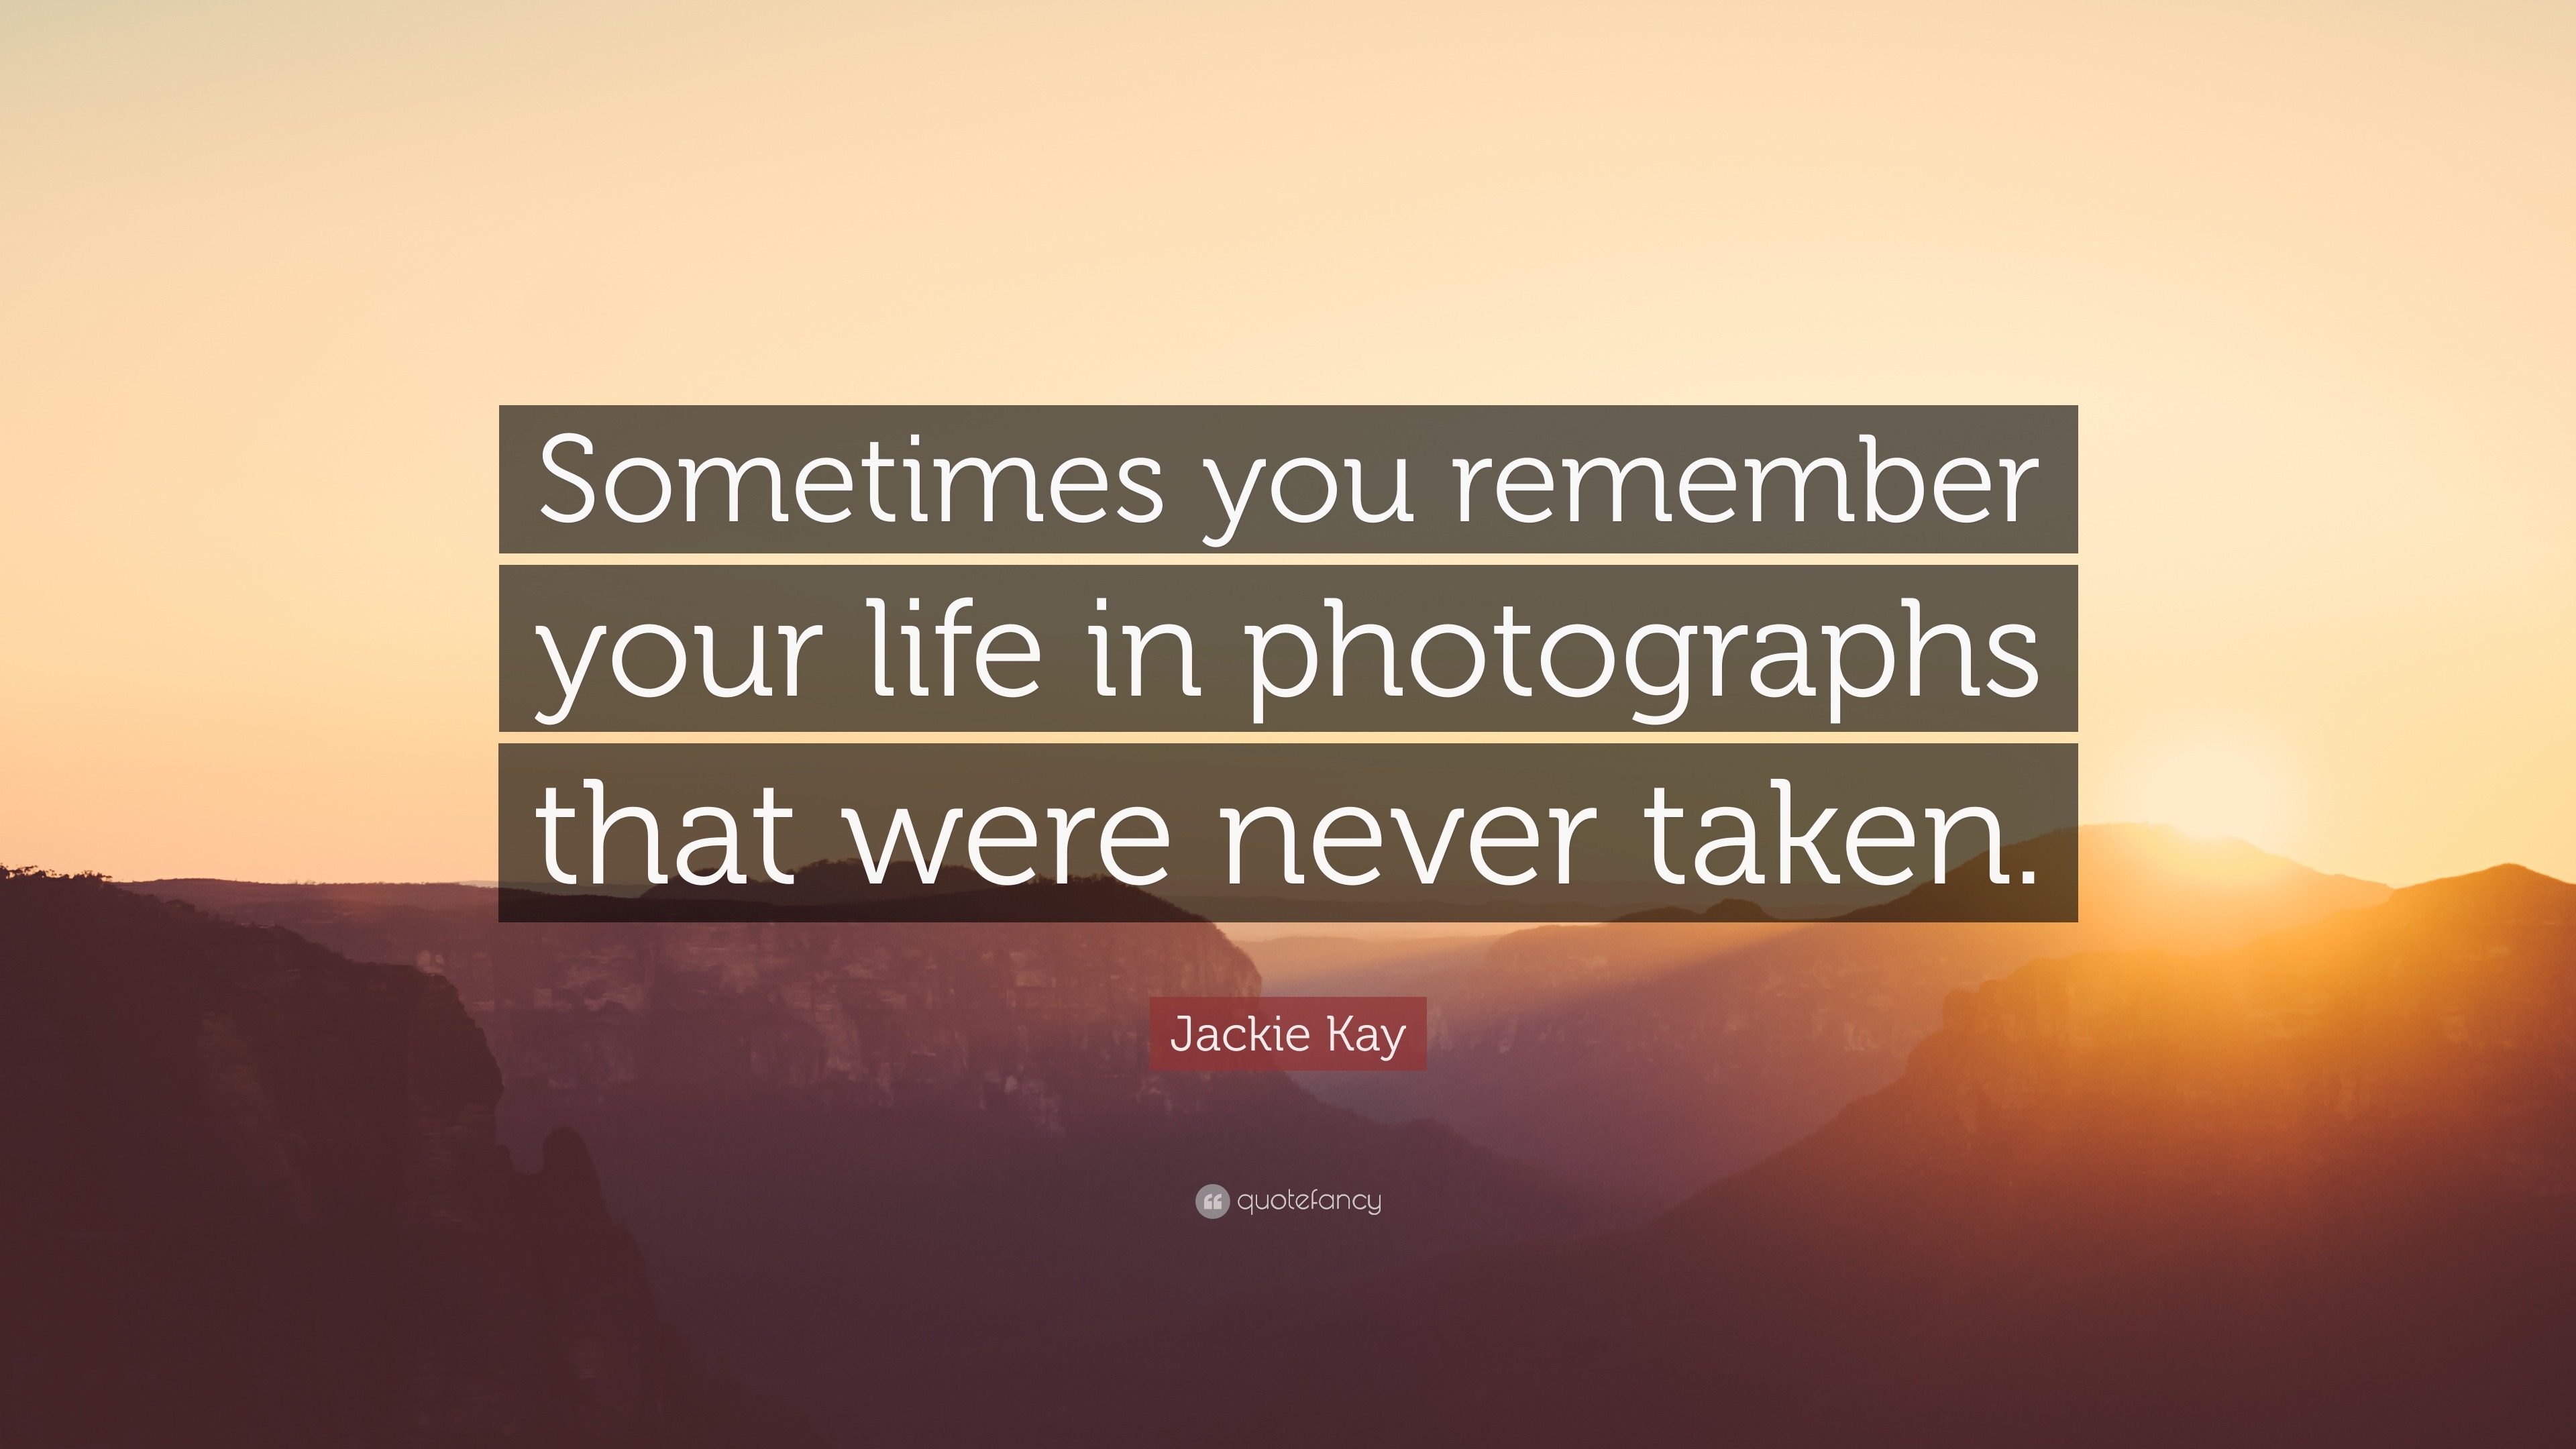 Jackie Kay Quote: “Sometimes you remember your life in photographs that ...